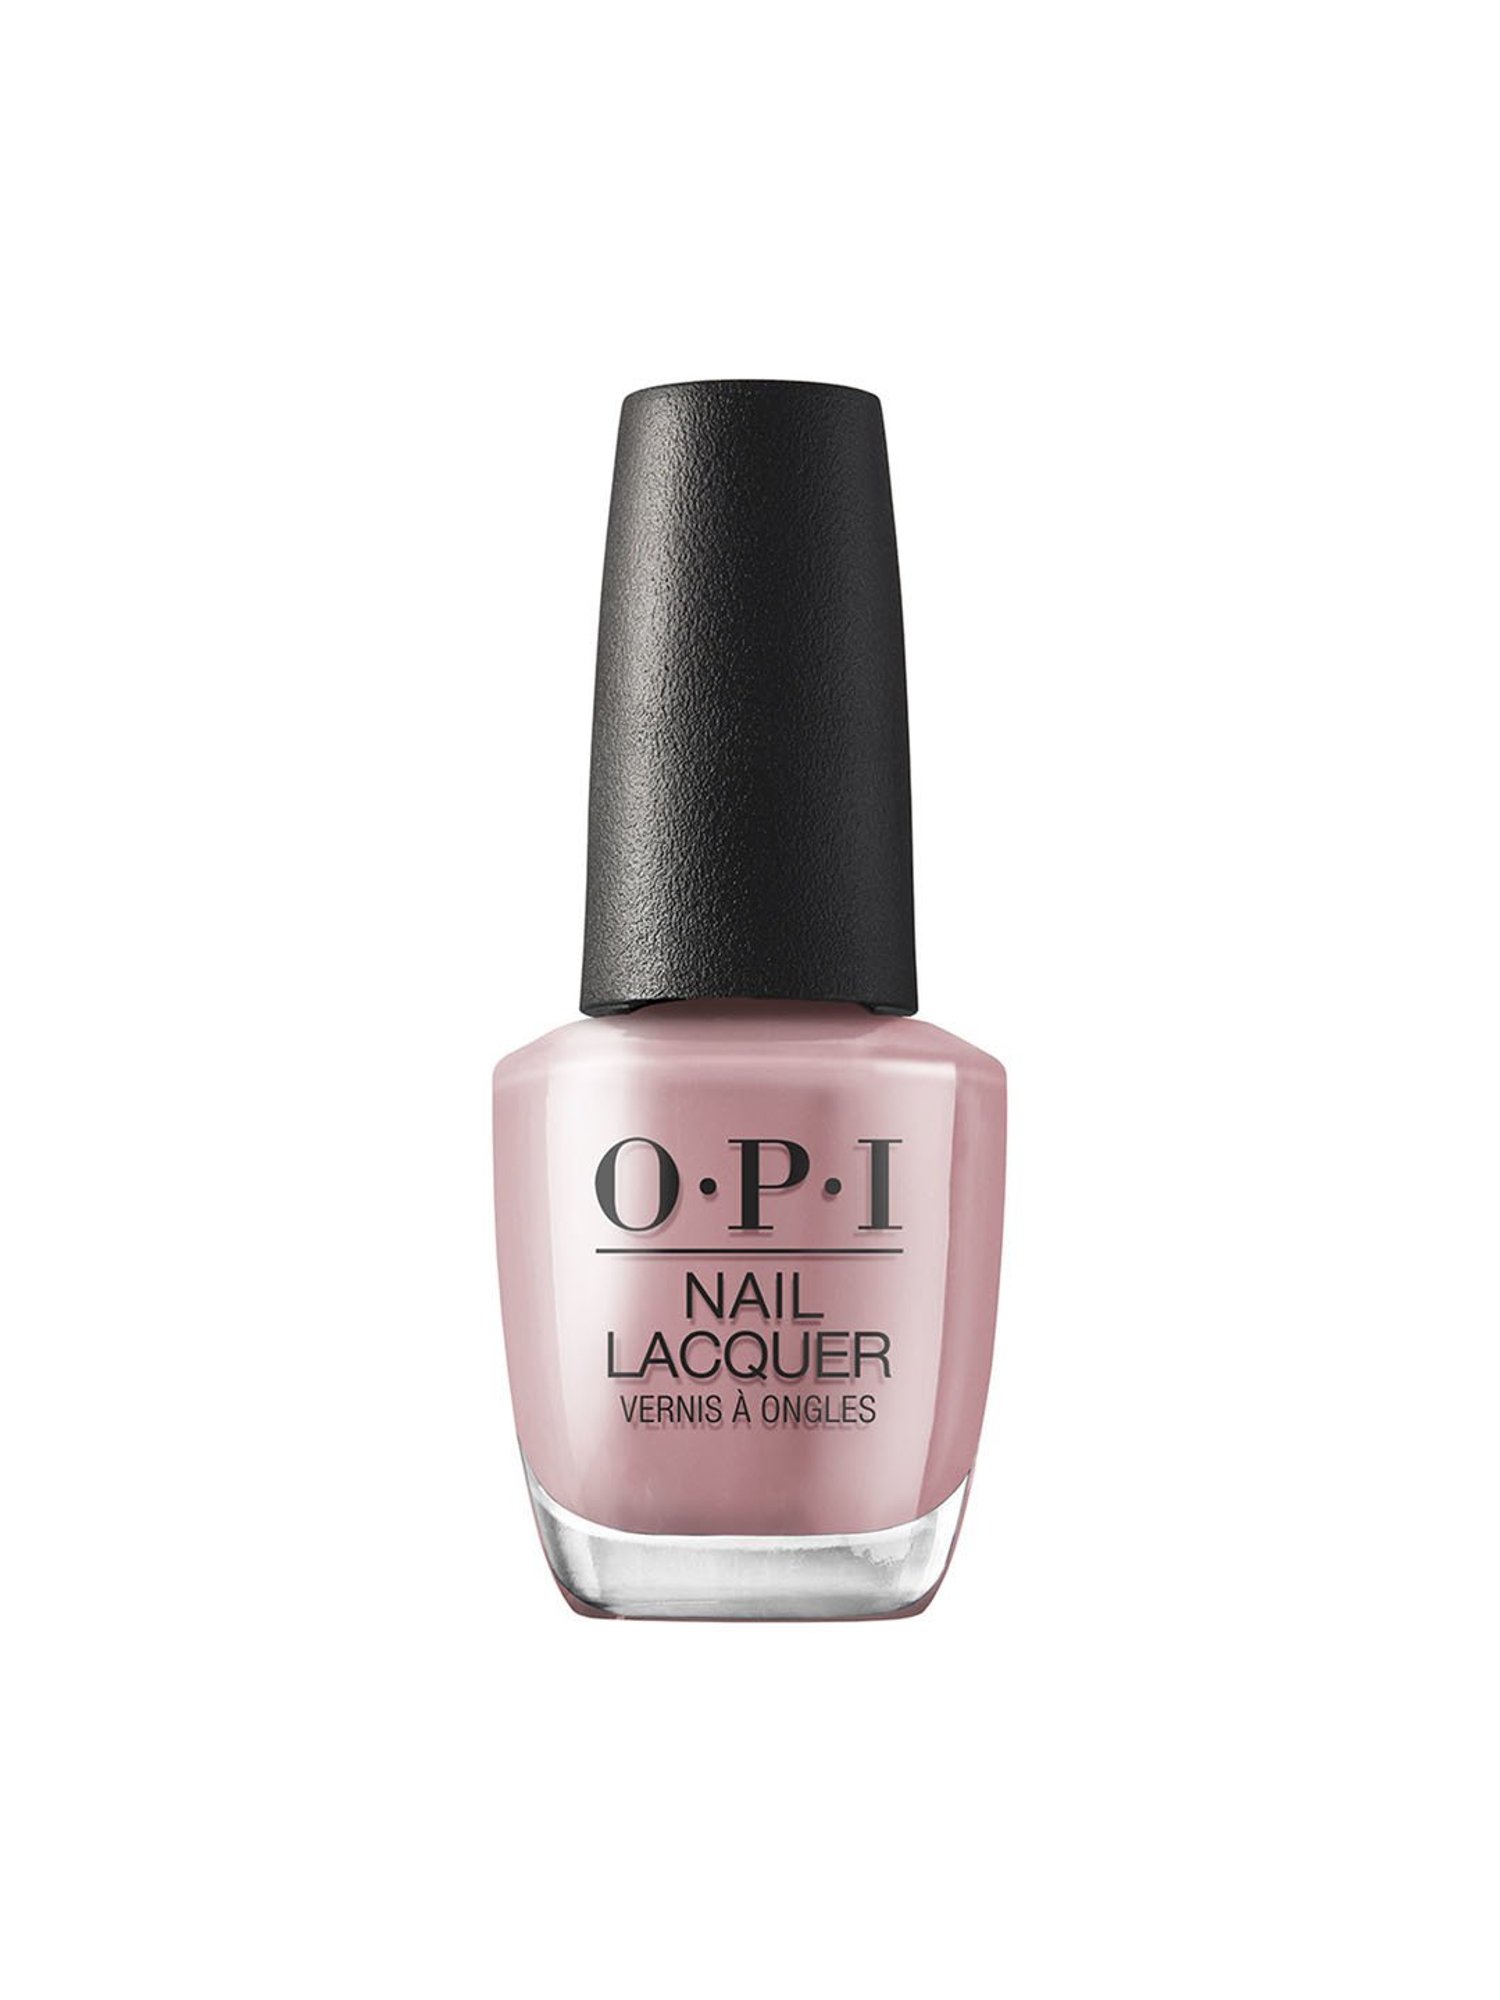 Latest OPI Release - Spring 2023 | Nail Polish Swatches & Review | Opi gel  nail polish, Spring nail polish colors, Opi nail polish colors